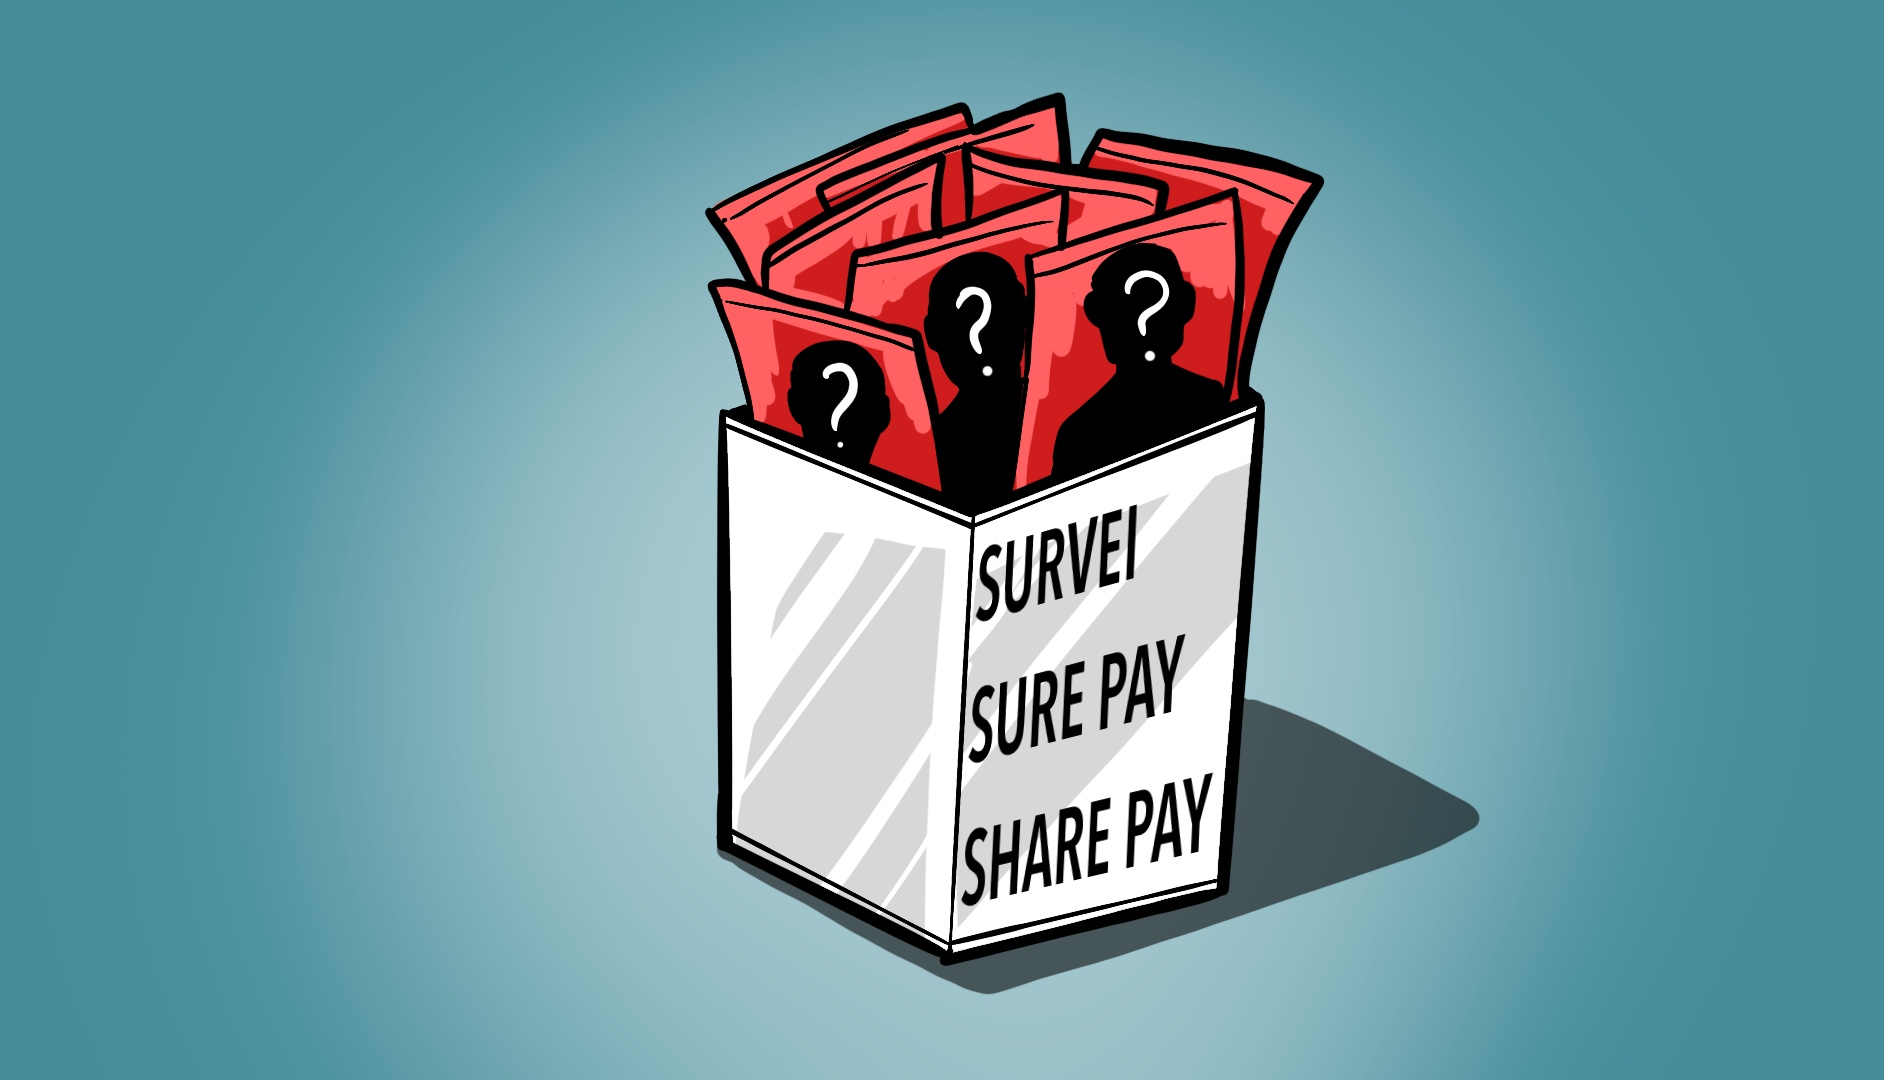 Survei, Sure Pay, Share Pay